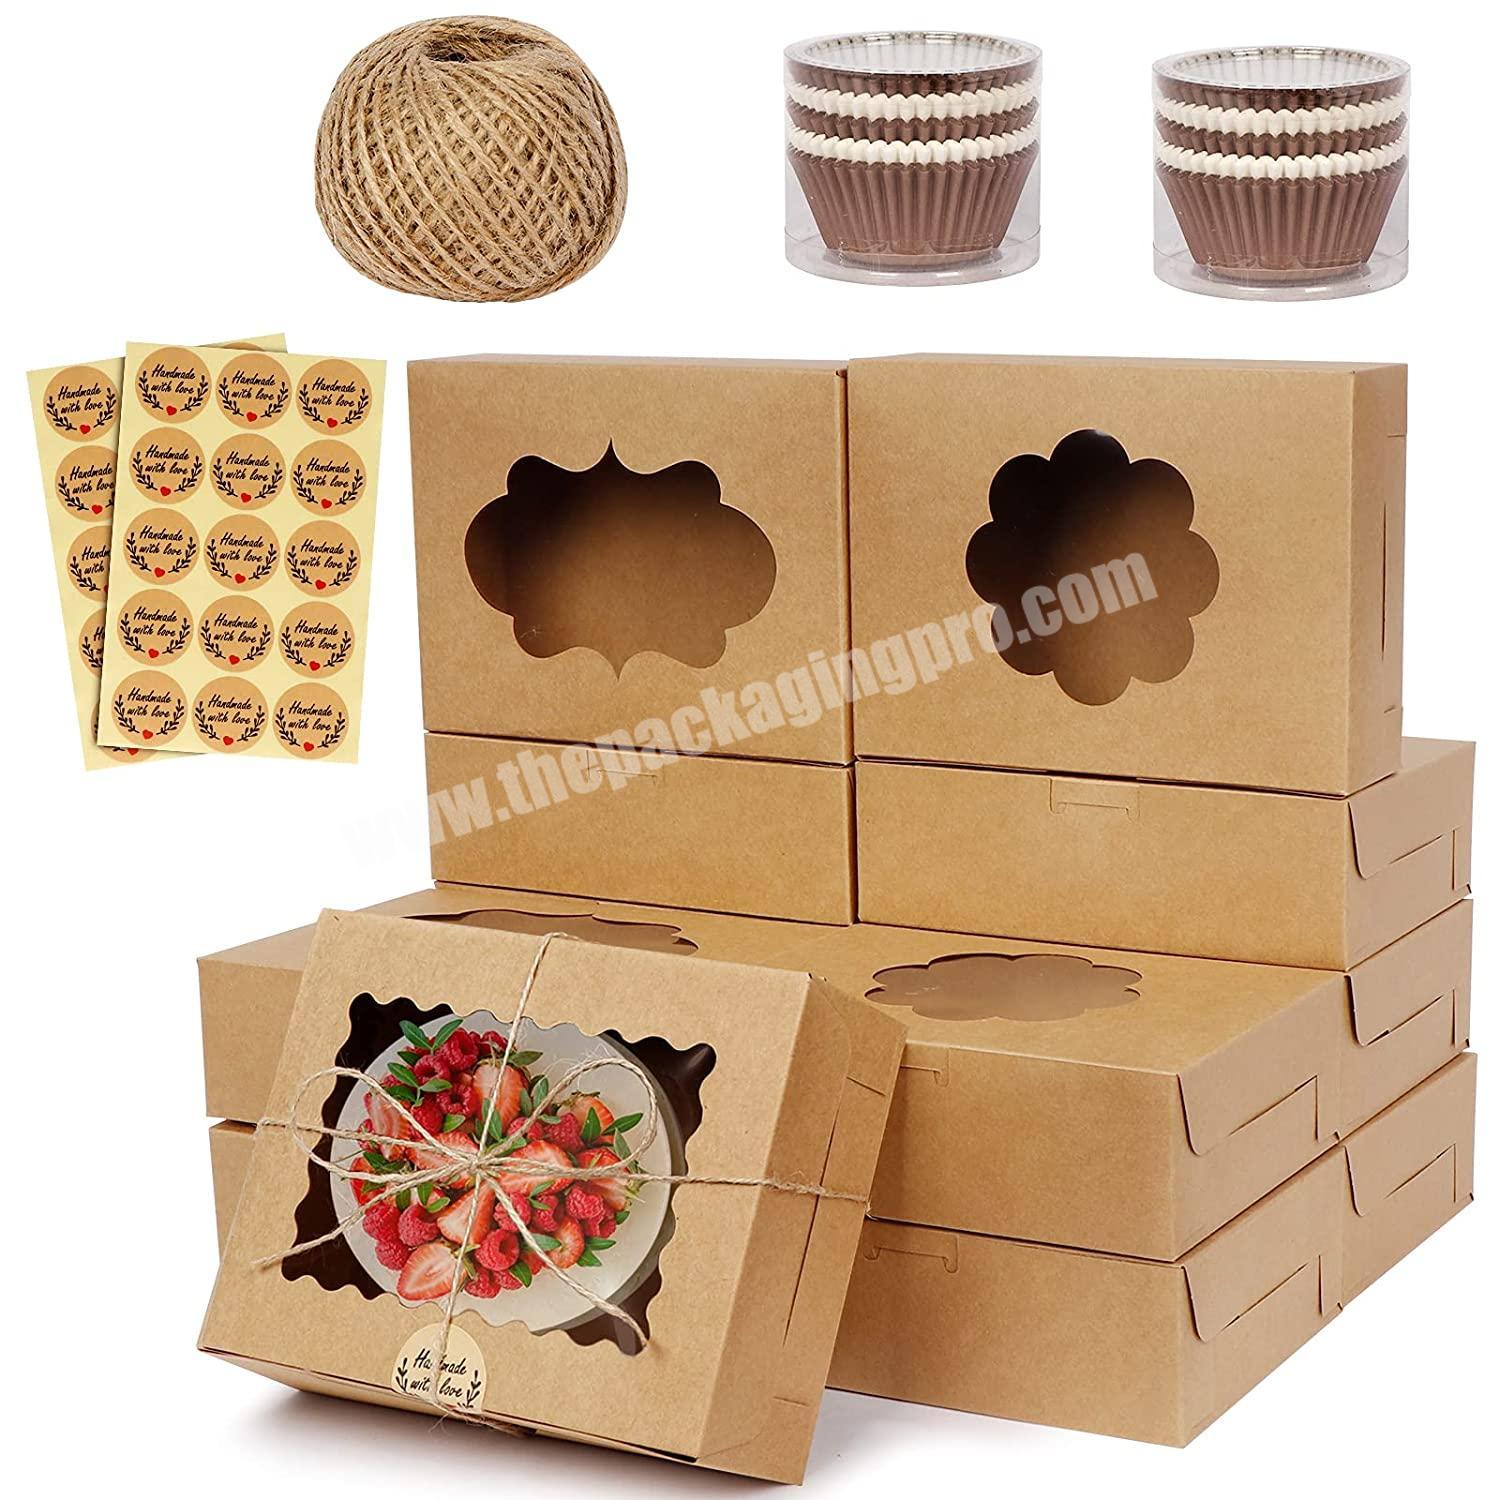 Kraft Paper Treat Boxes with window for Strawberries Cupcakes Donuts Includes Cupcake Liners Stickers and Ribbons